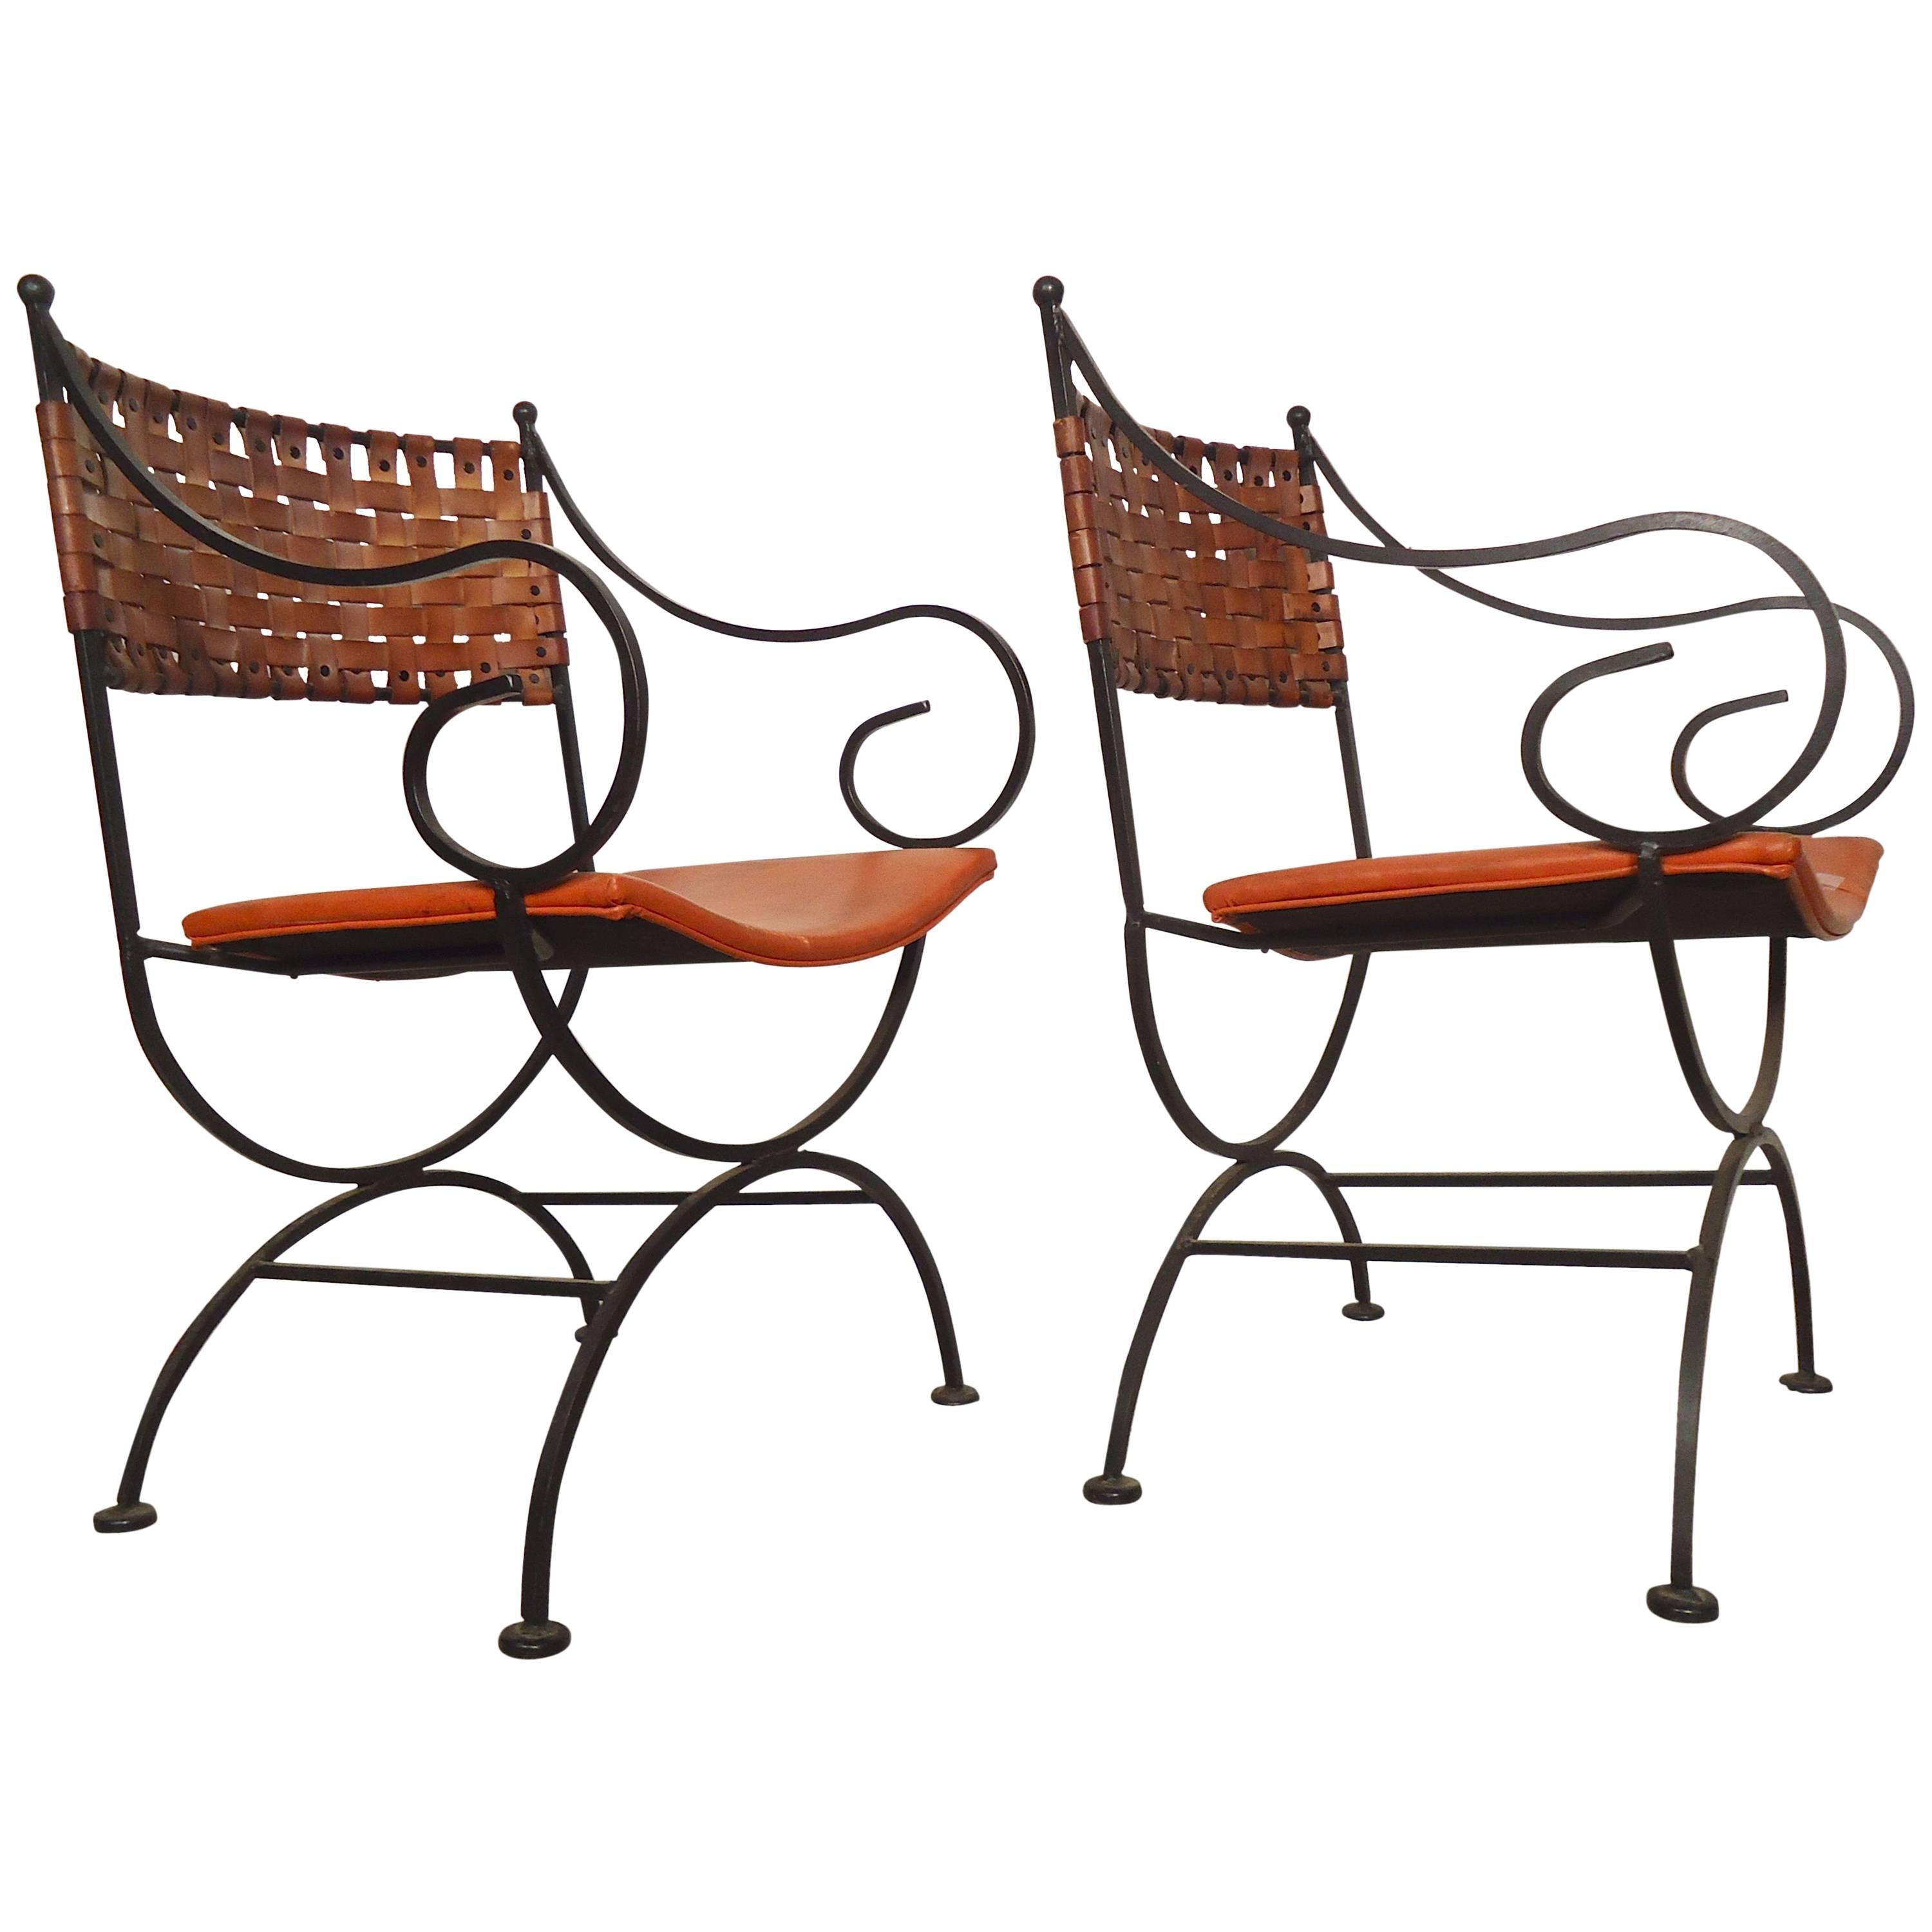 Beautiful Iron Chairs by Shaver-Howard